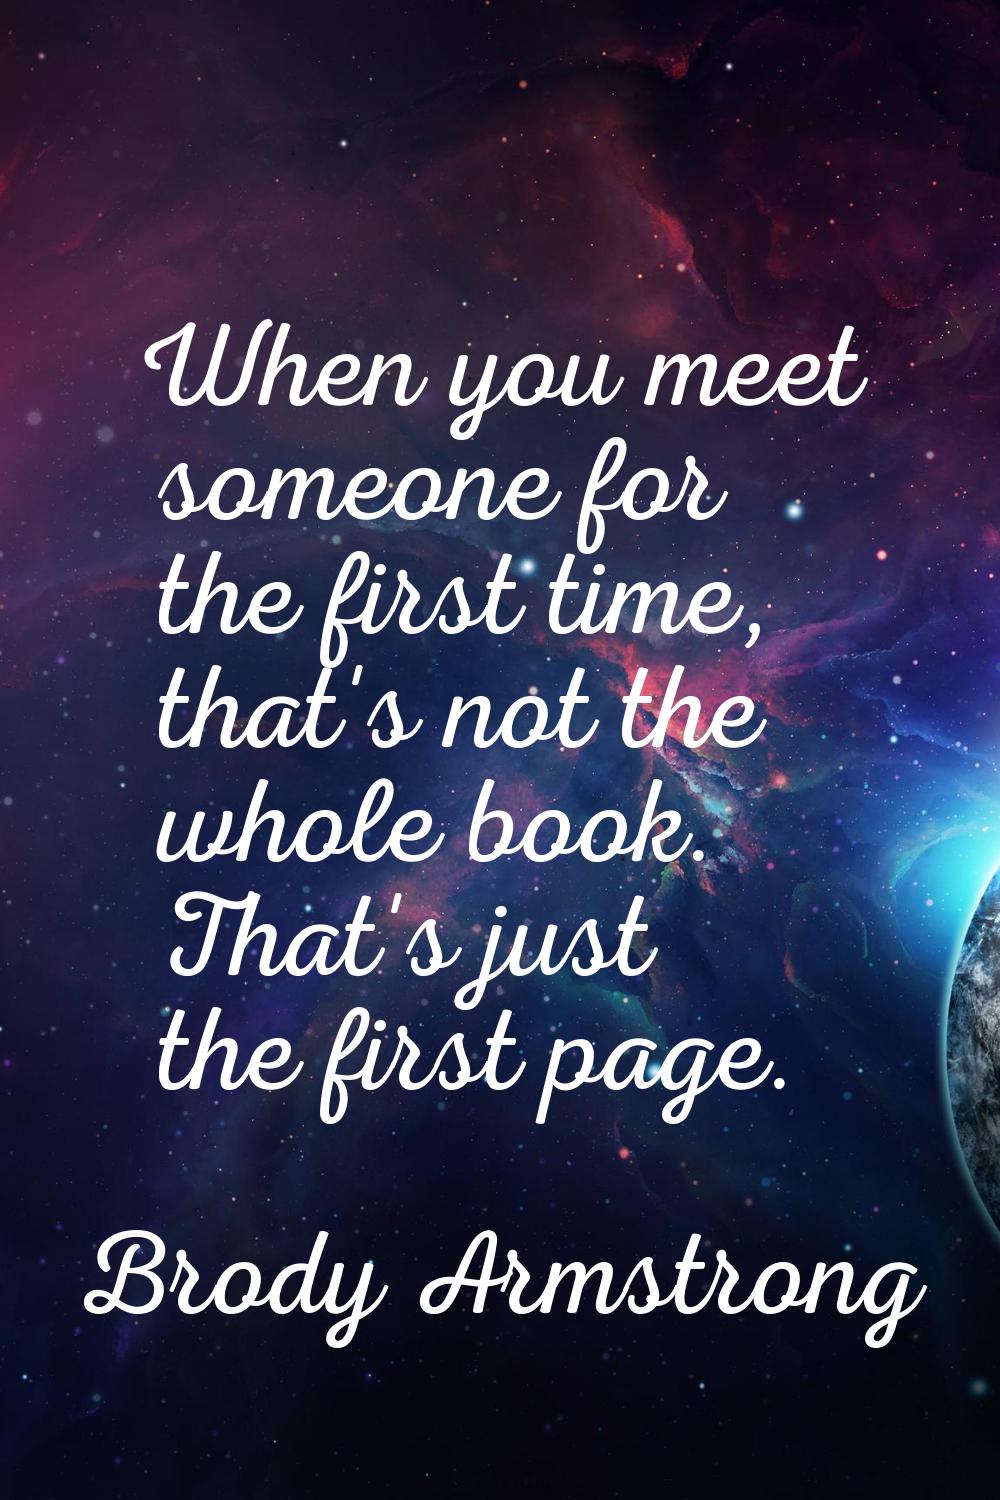 When you meet someone for the first time, that's not the whole book. That's just the first page.